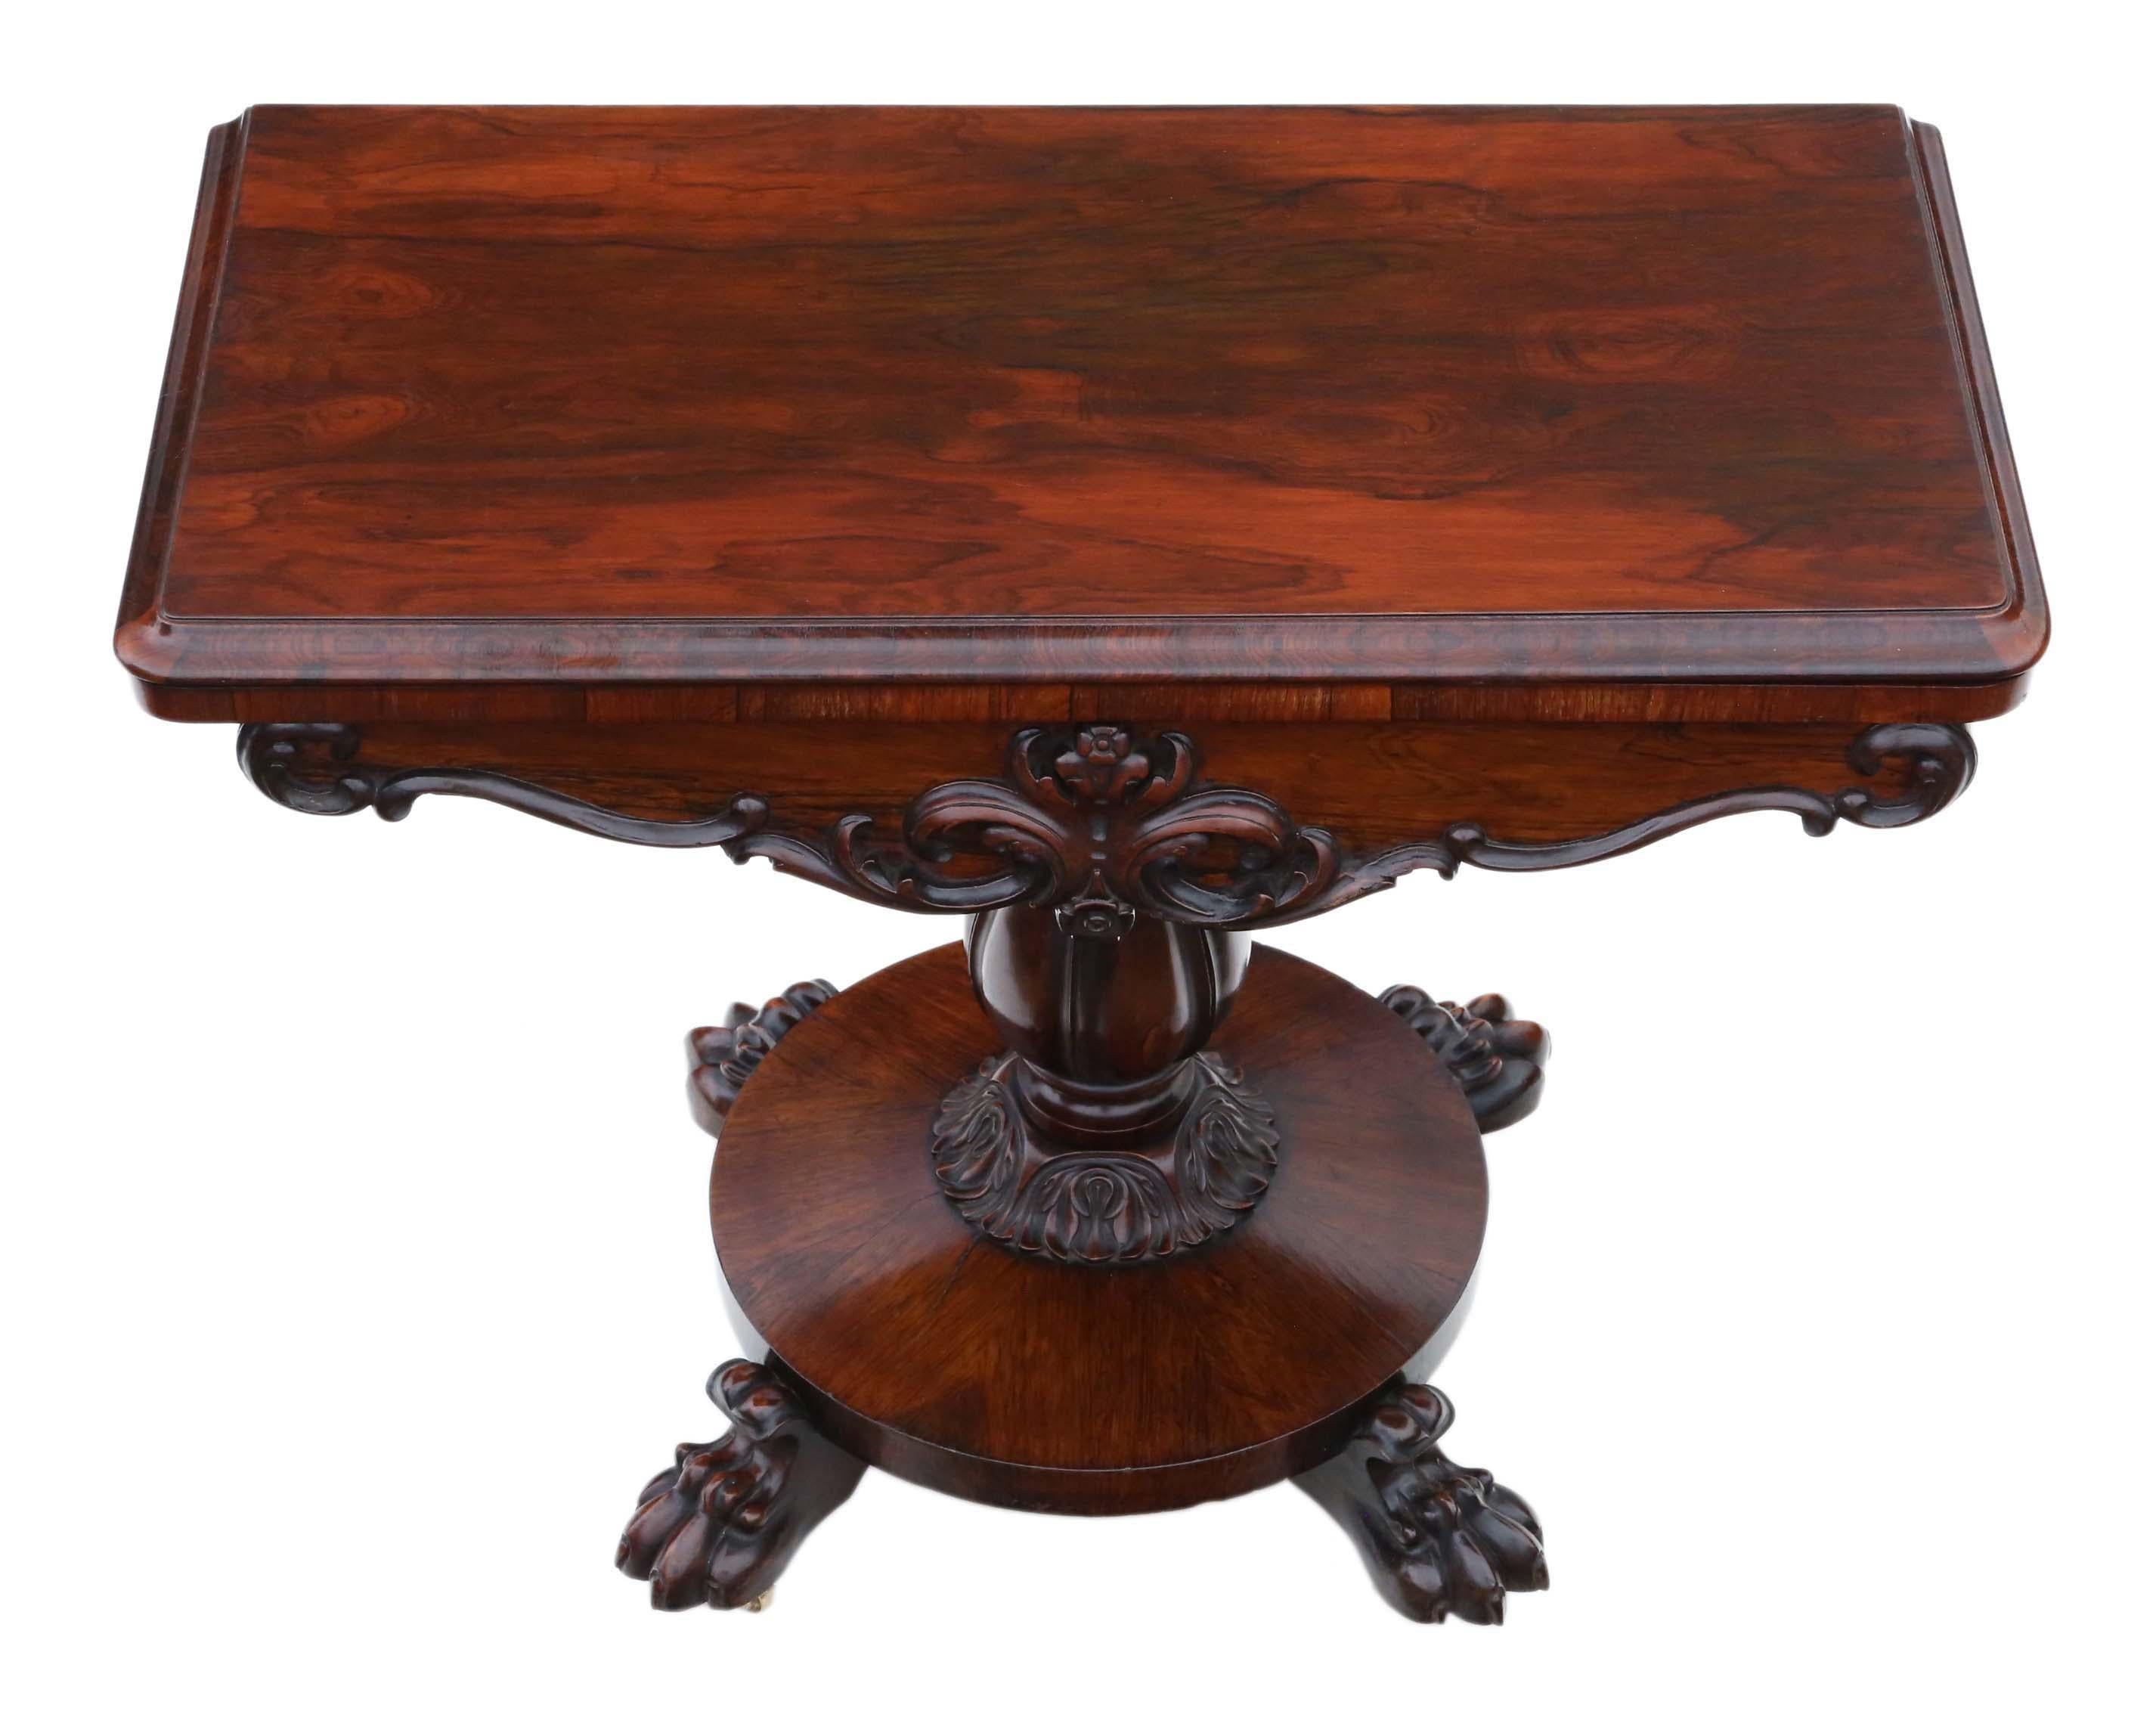 Very fine quality Regency / William IV rosewood folding card tea console table, circa1825.

This is a lovely table of exceptional quality. Historically restored to a good standard.

The Velour playing surface is in good order with no major marks